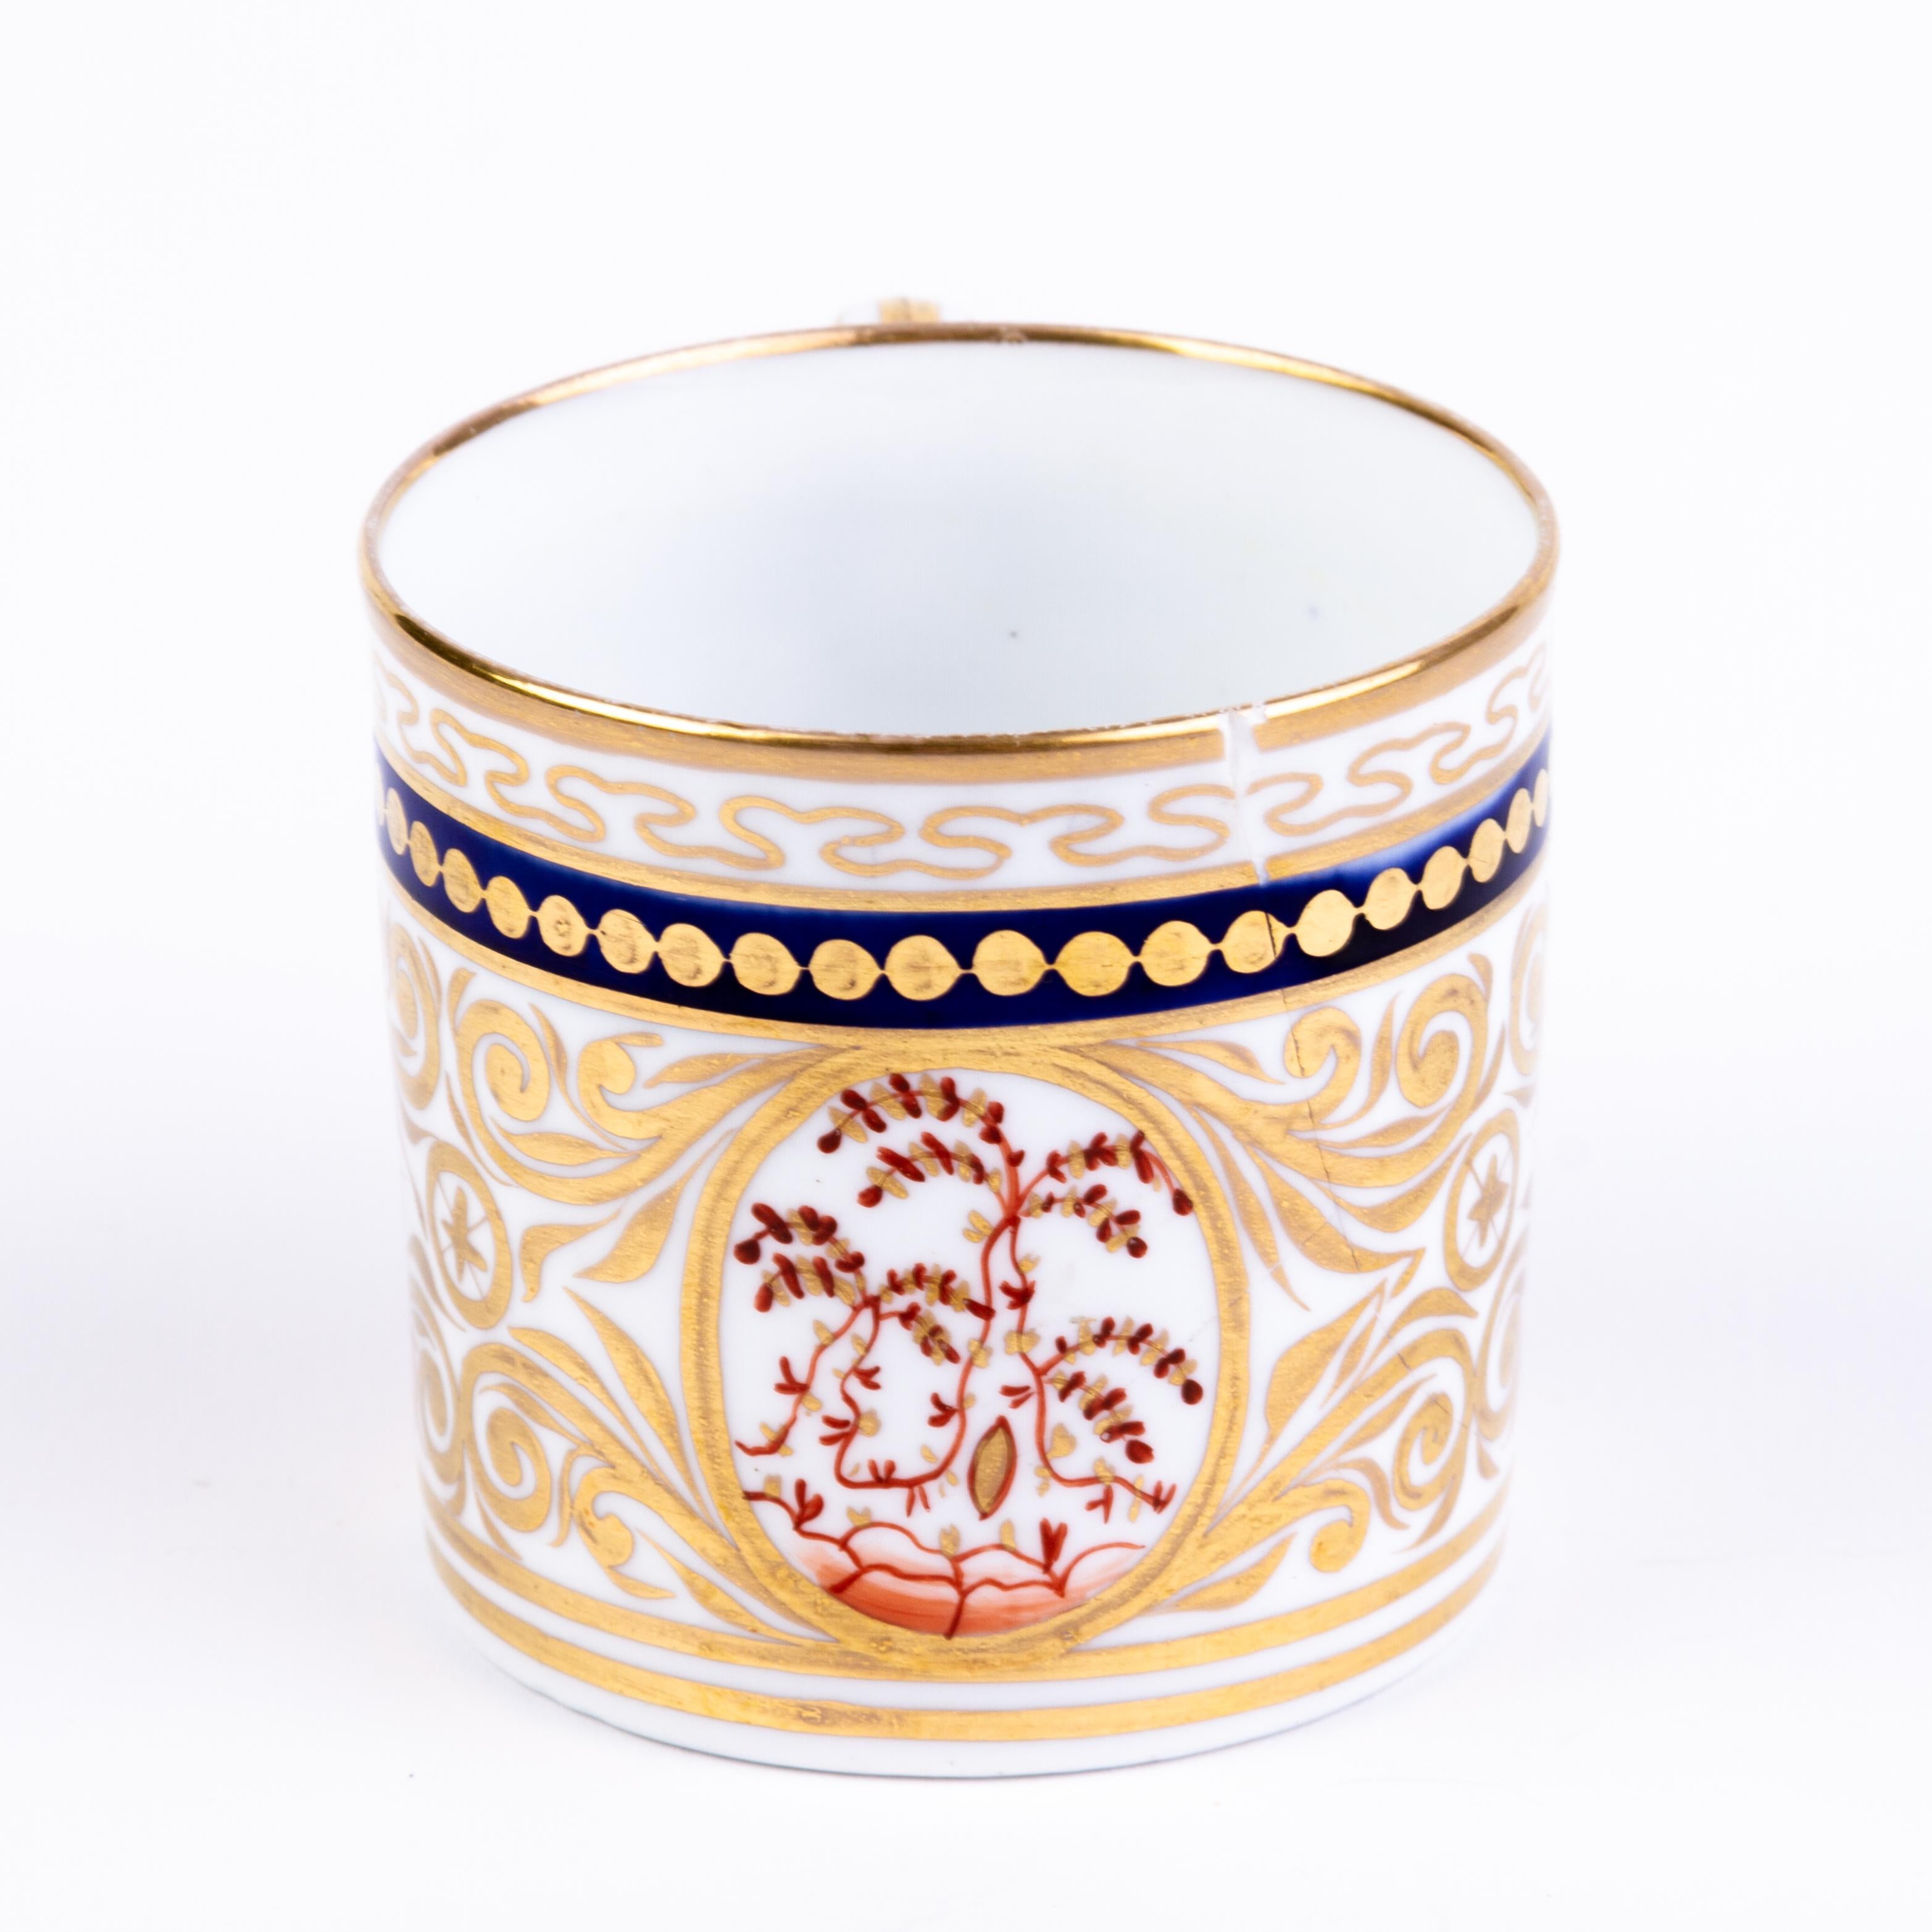 English Georgian Minton Hand-Painted Porcelain Coffee Can Early 19th Century
Good condition
From a private collection.
Free international shipping.